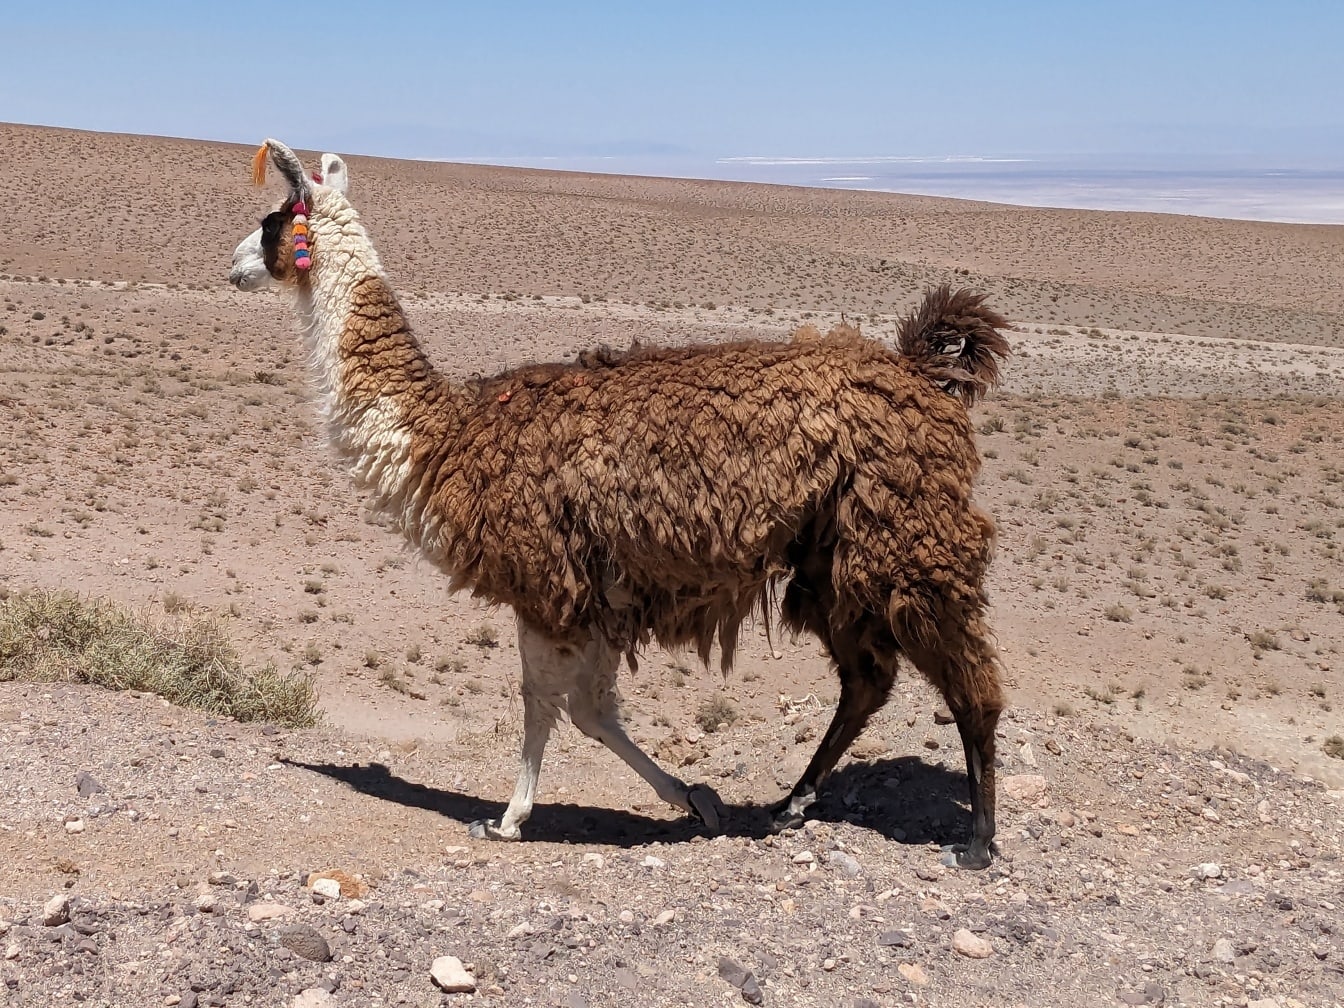 Domesticated Peruvian lama in a desert with decoration on ears (Lama glama)